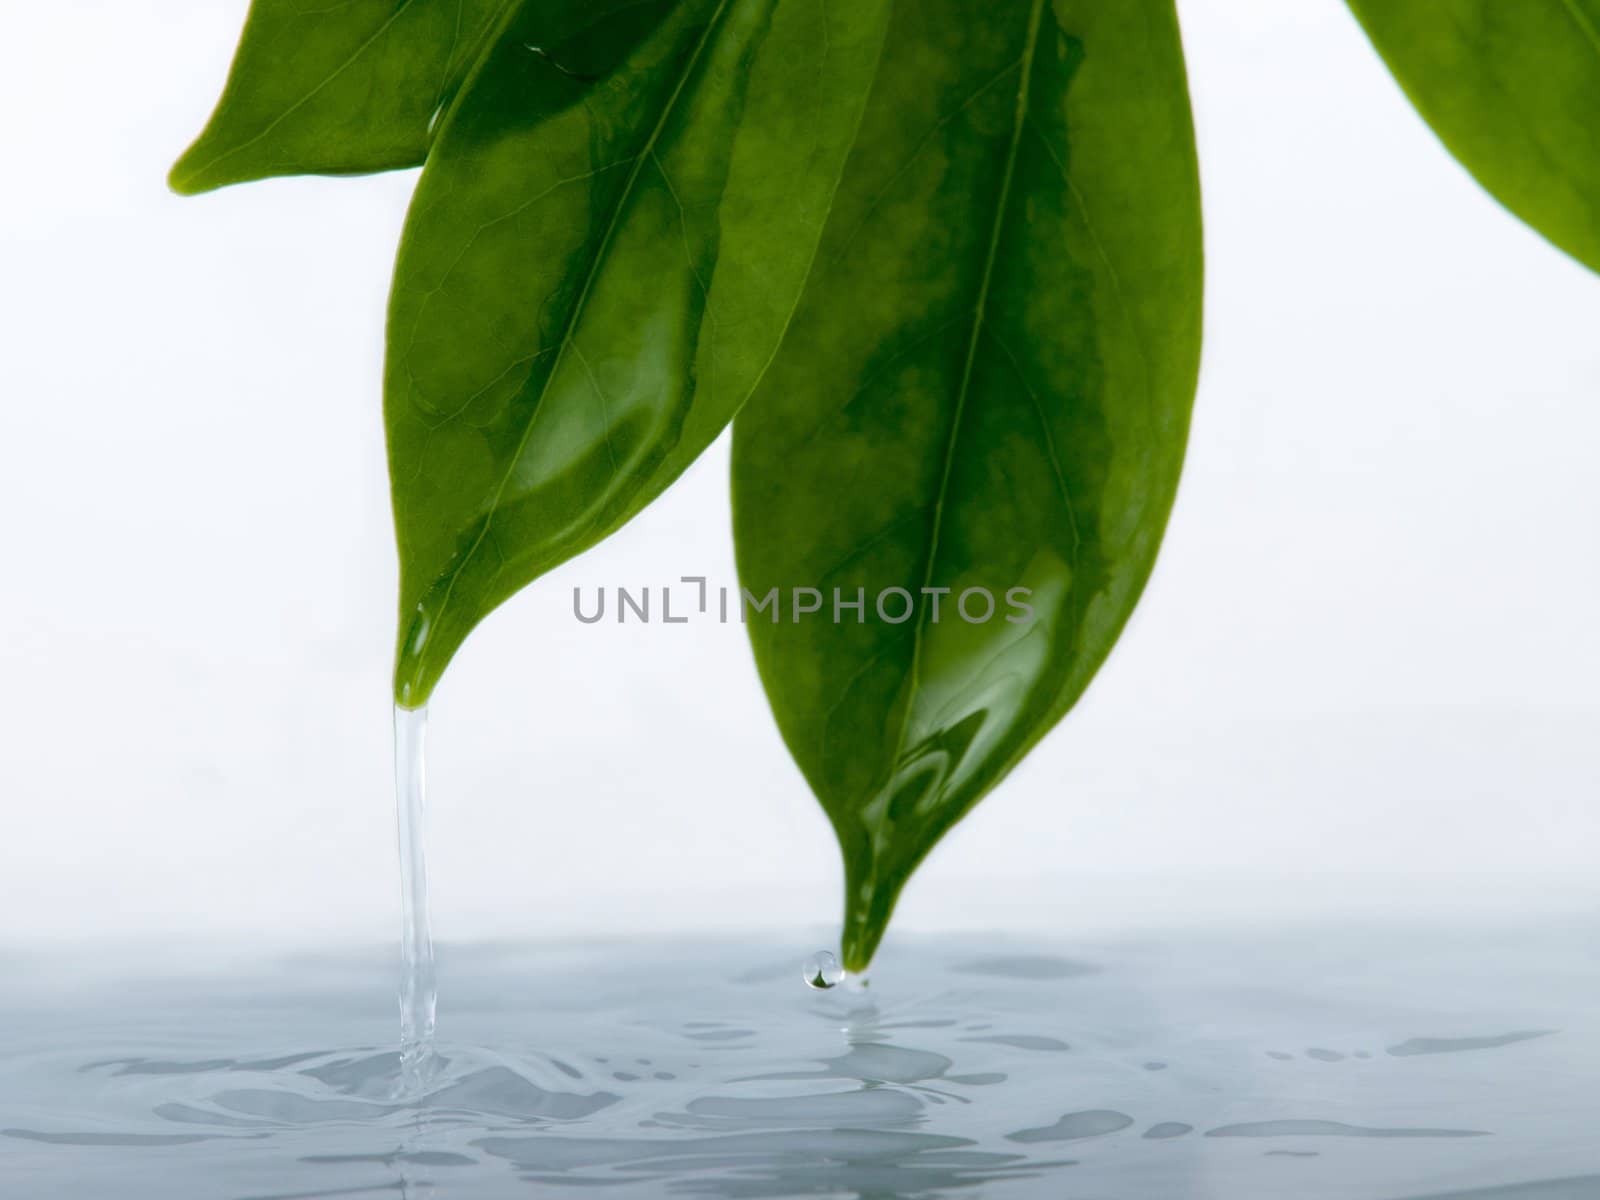 Photography from the leaves of water flowing into the tank